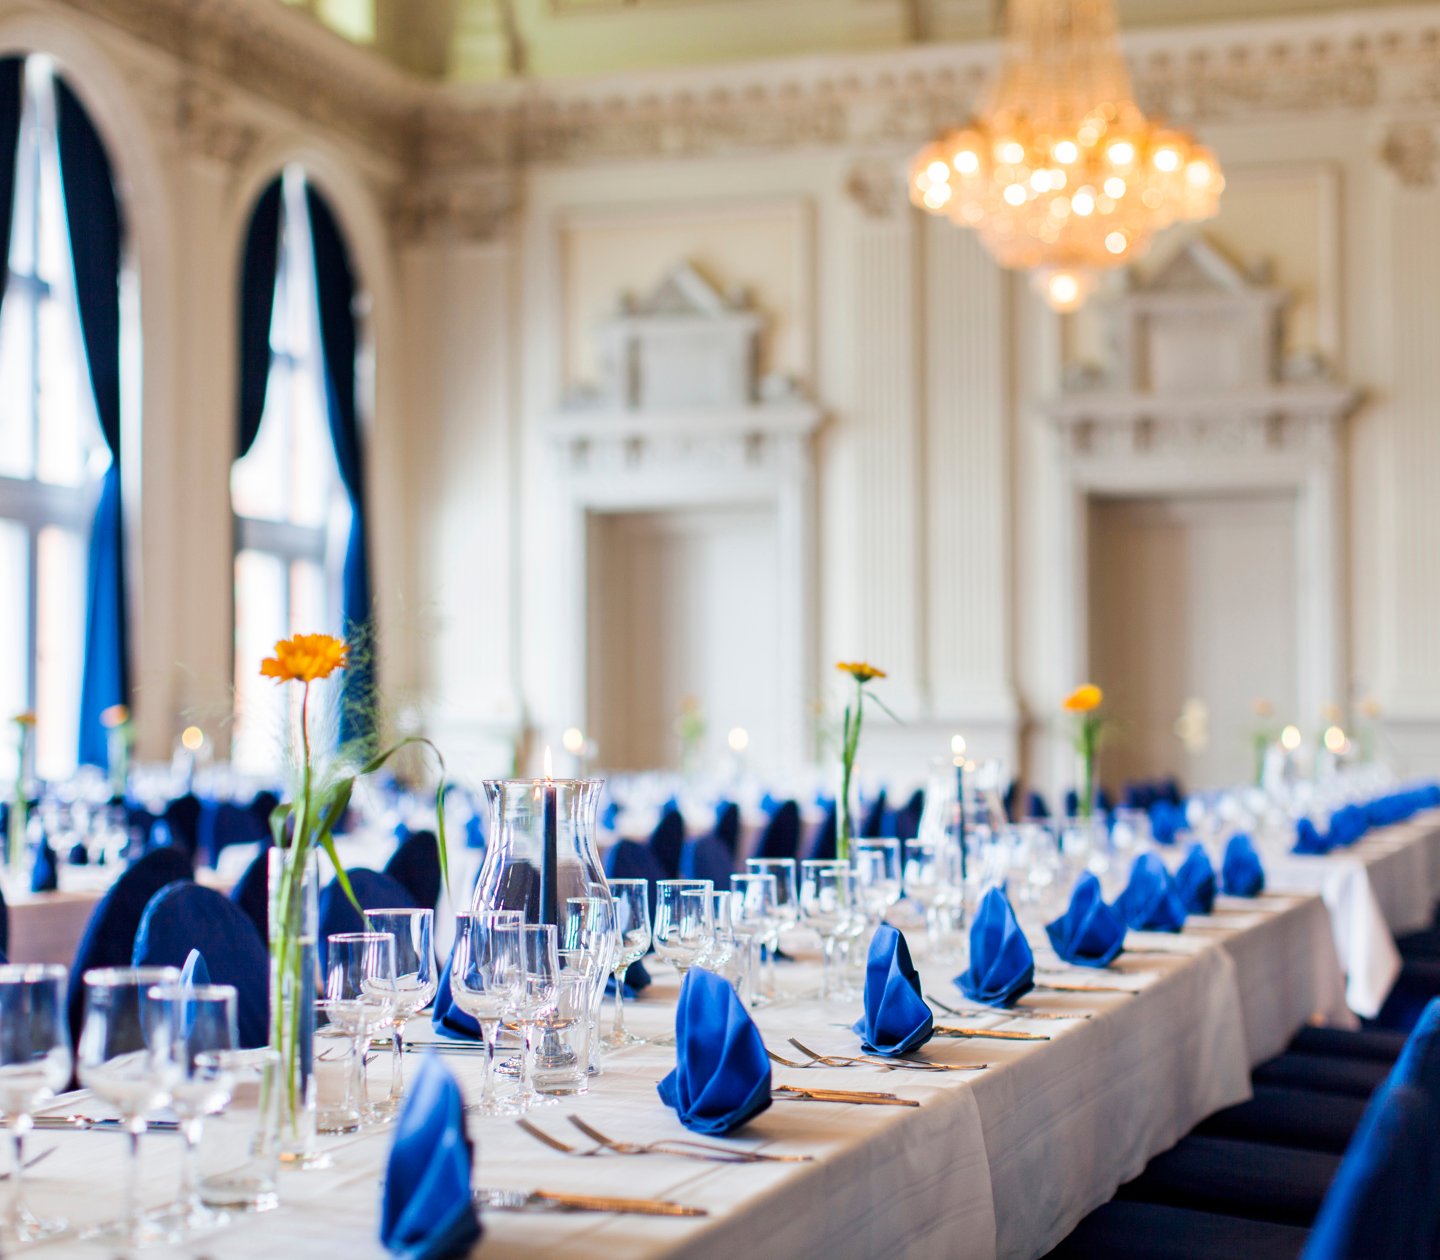 Long table in wedding venue decorated with blue napkins